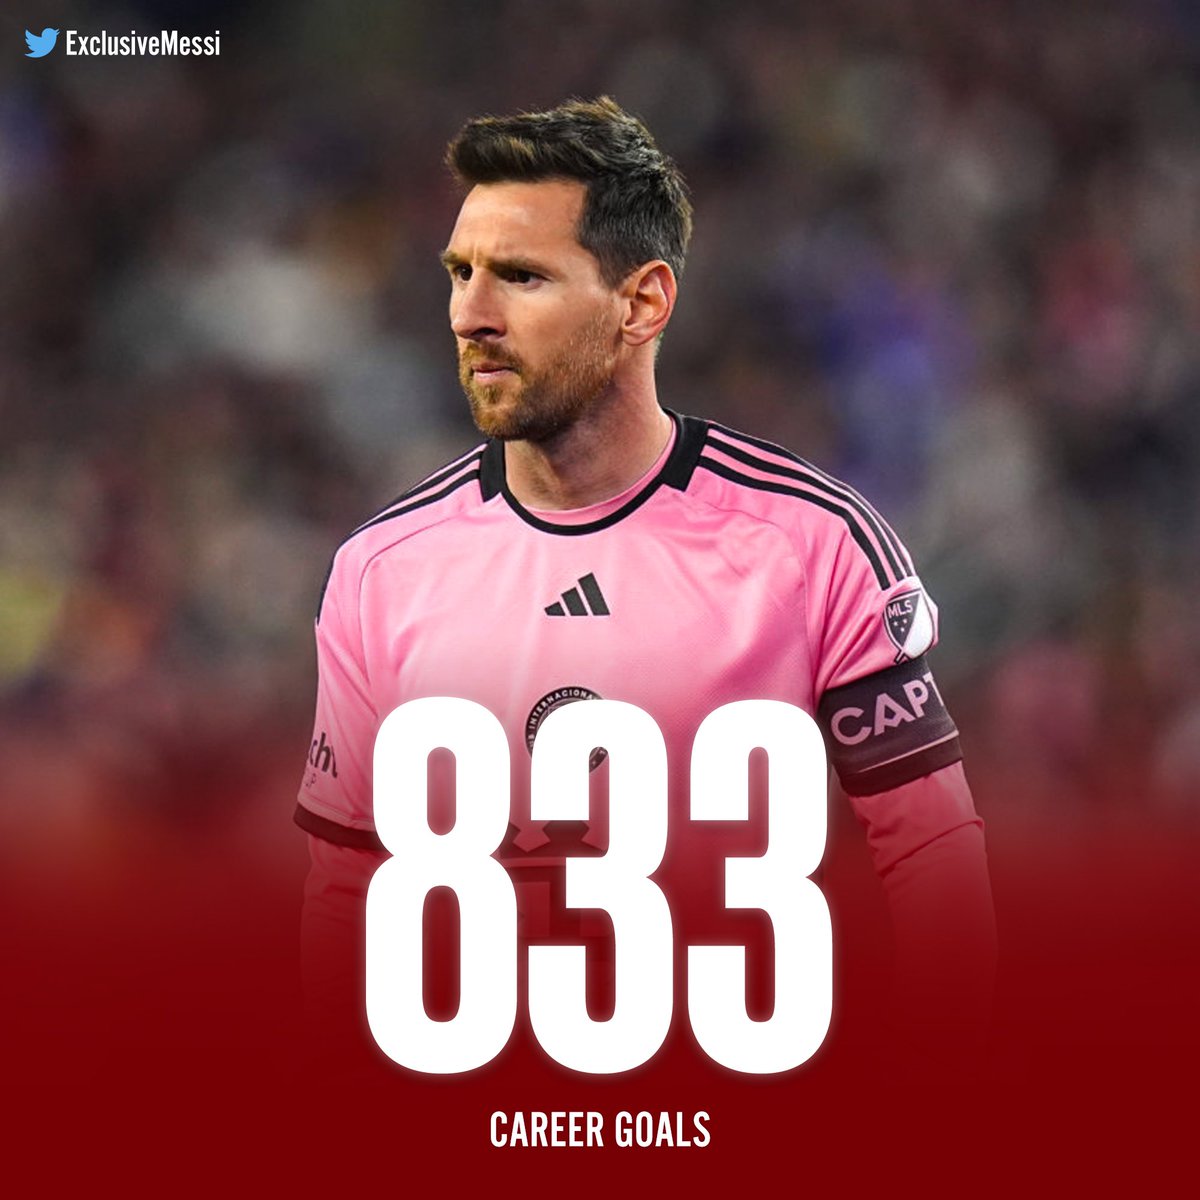 🚨 LIONEL MESSI HAS NOW SCORED 833 CAREER GOALS!!

He’s the only 36 year old to ever do it 🤯